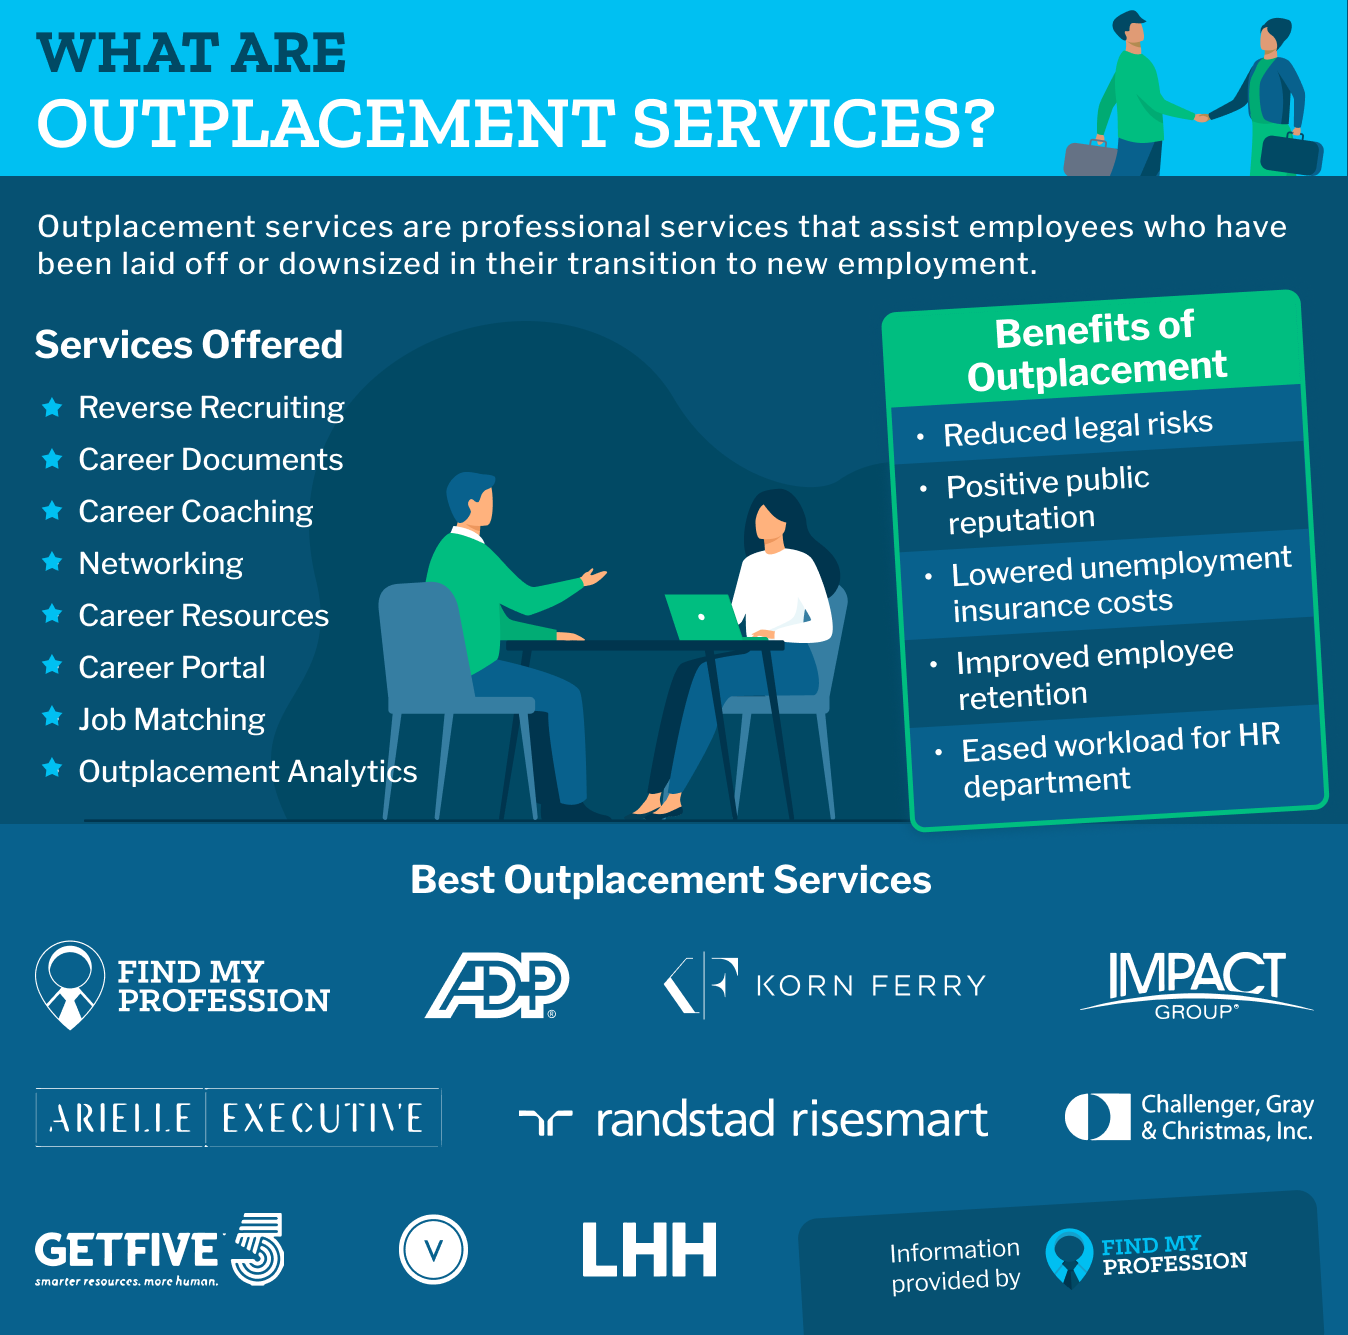 What Are Outplacement Services?